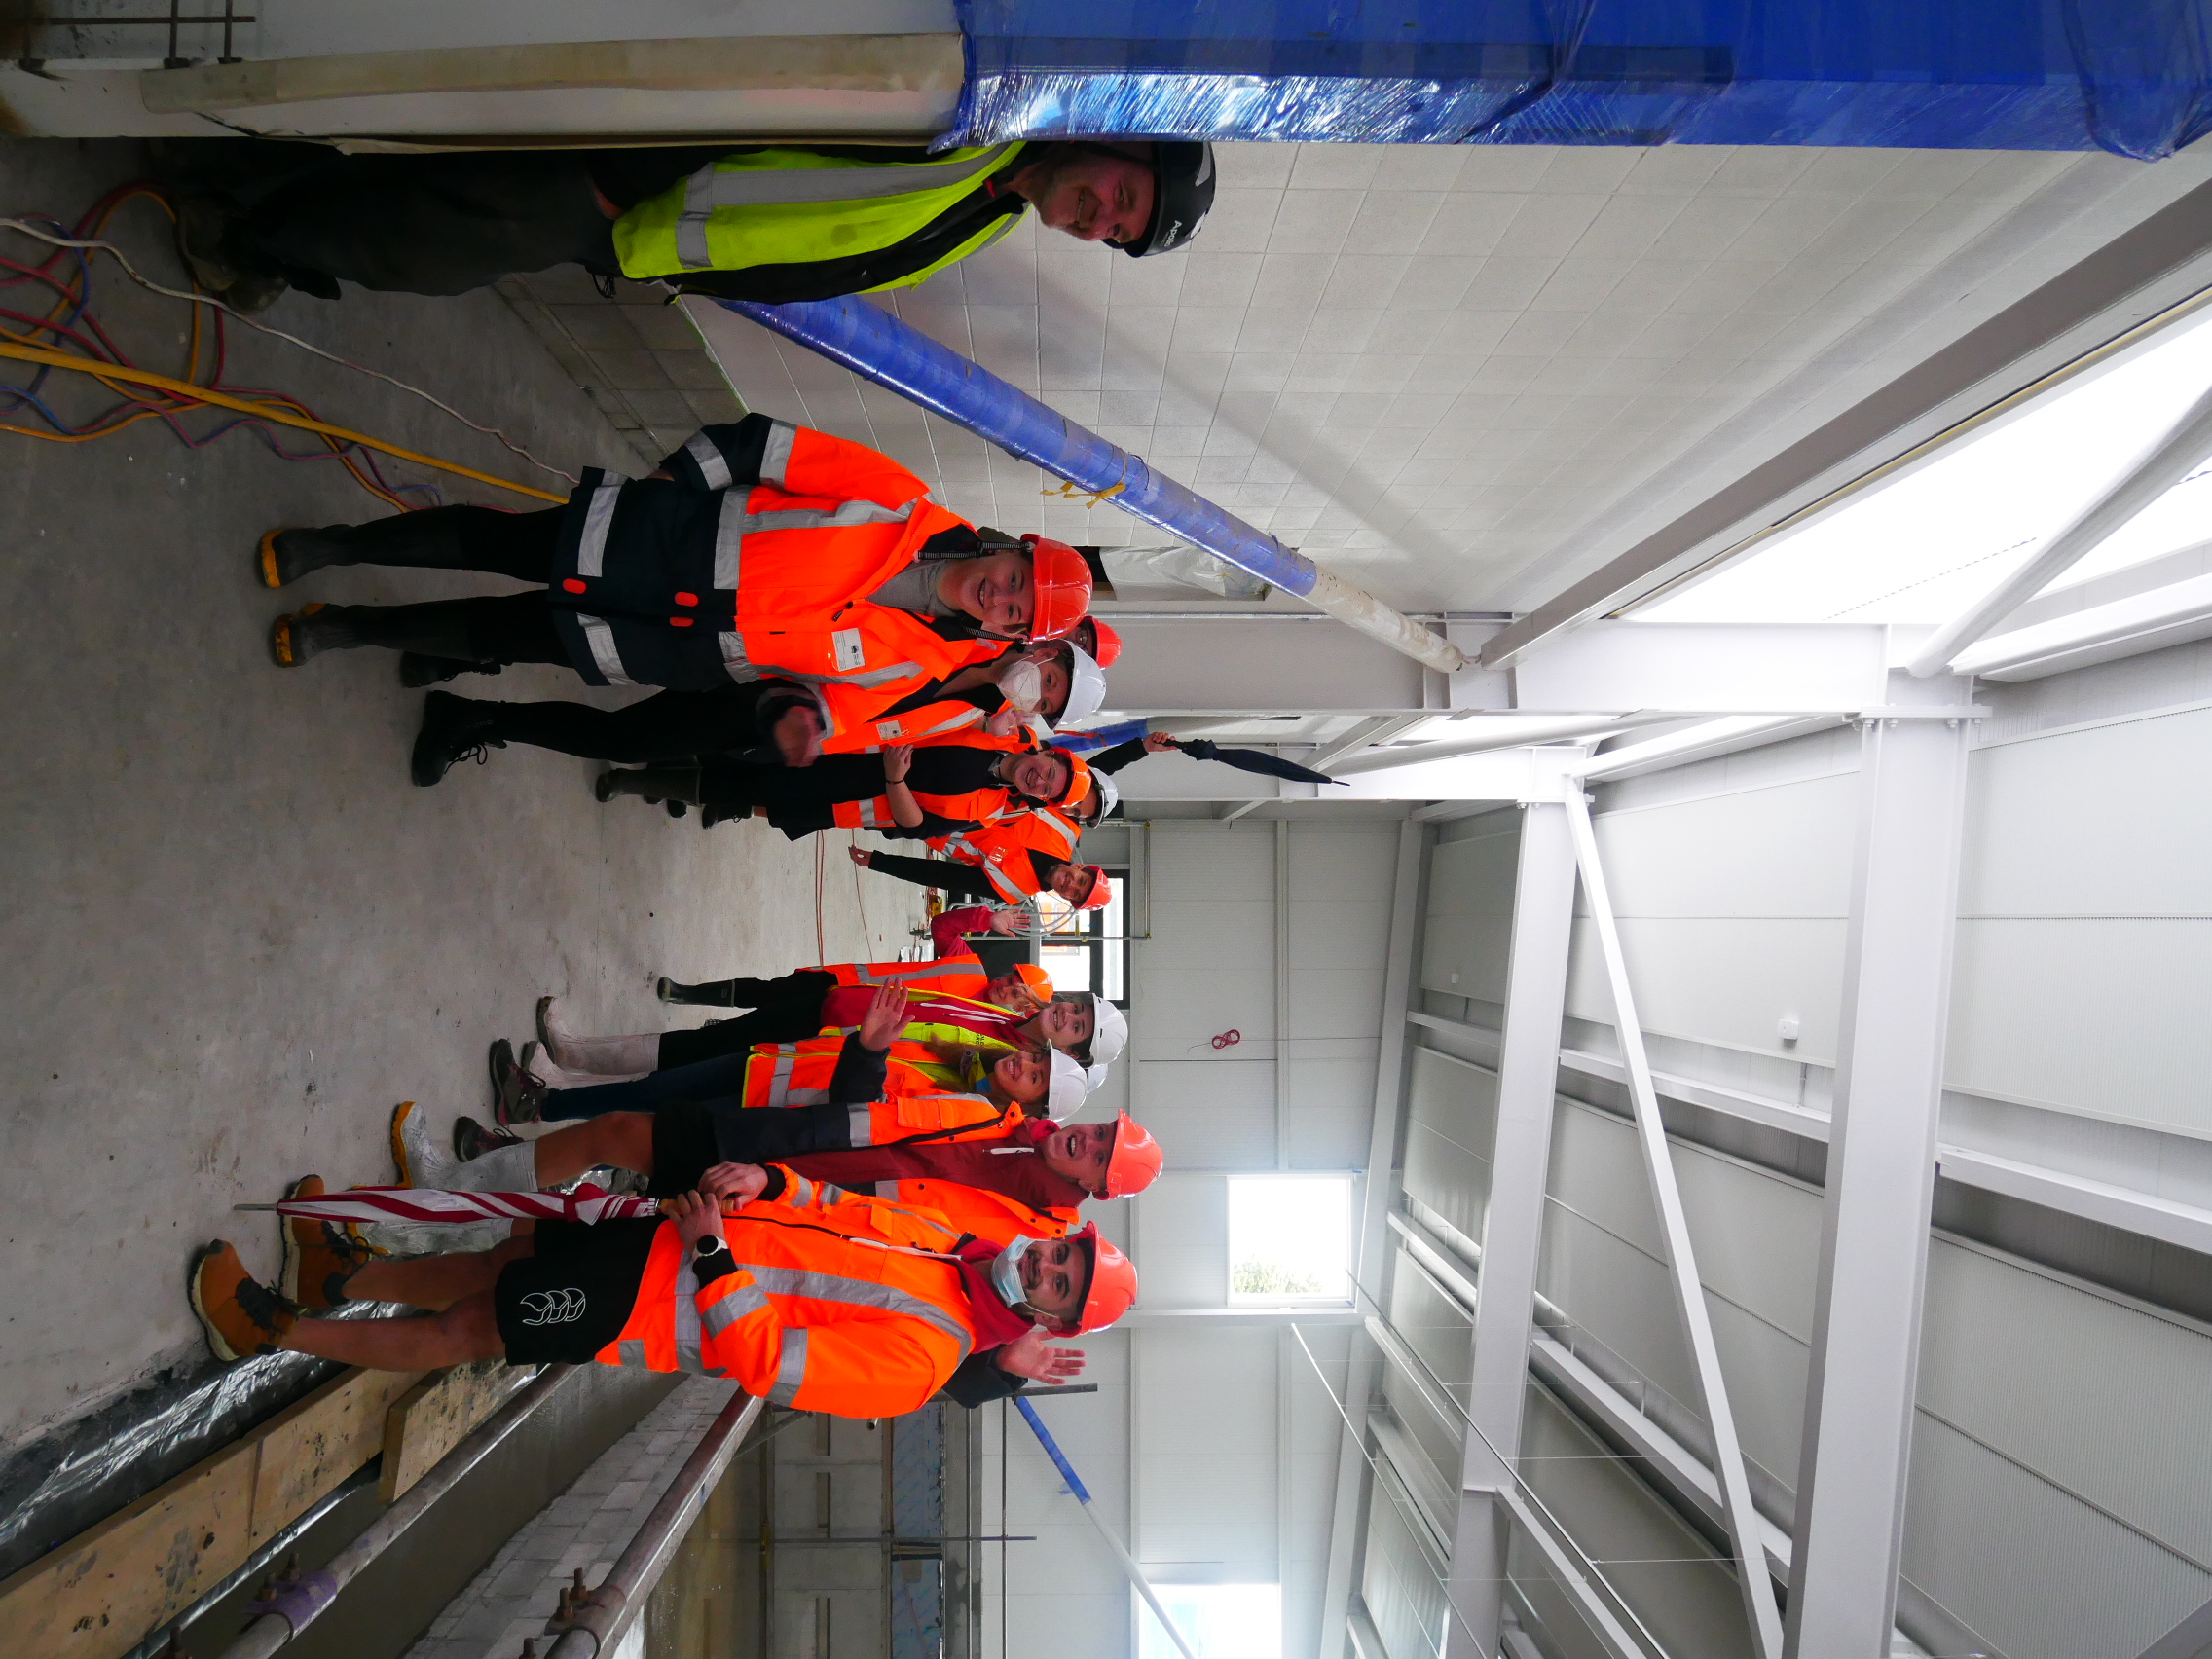 Pool staff on tour of facility in June 2022